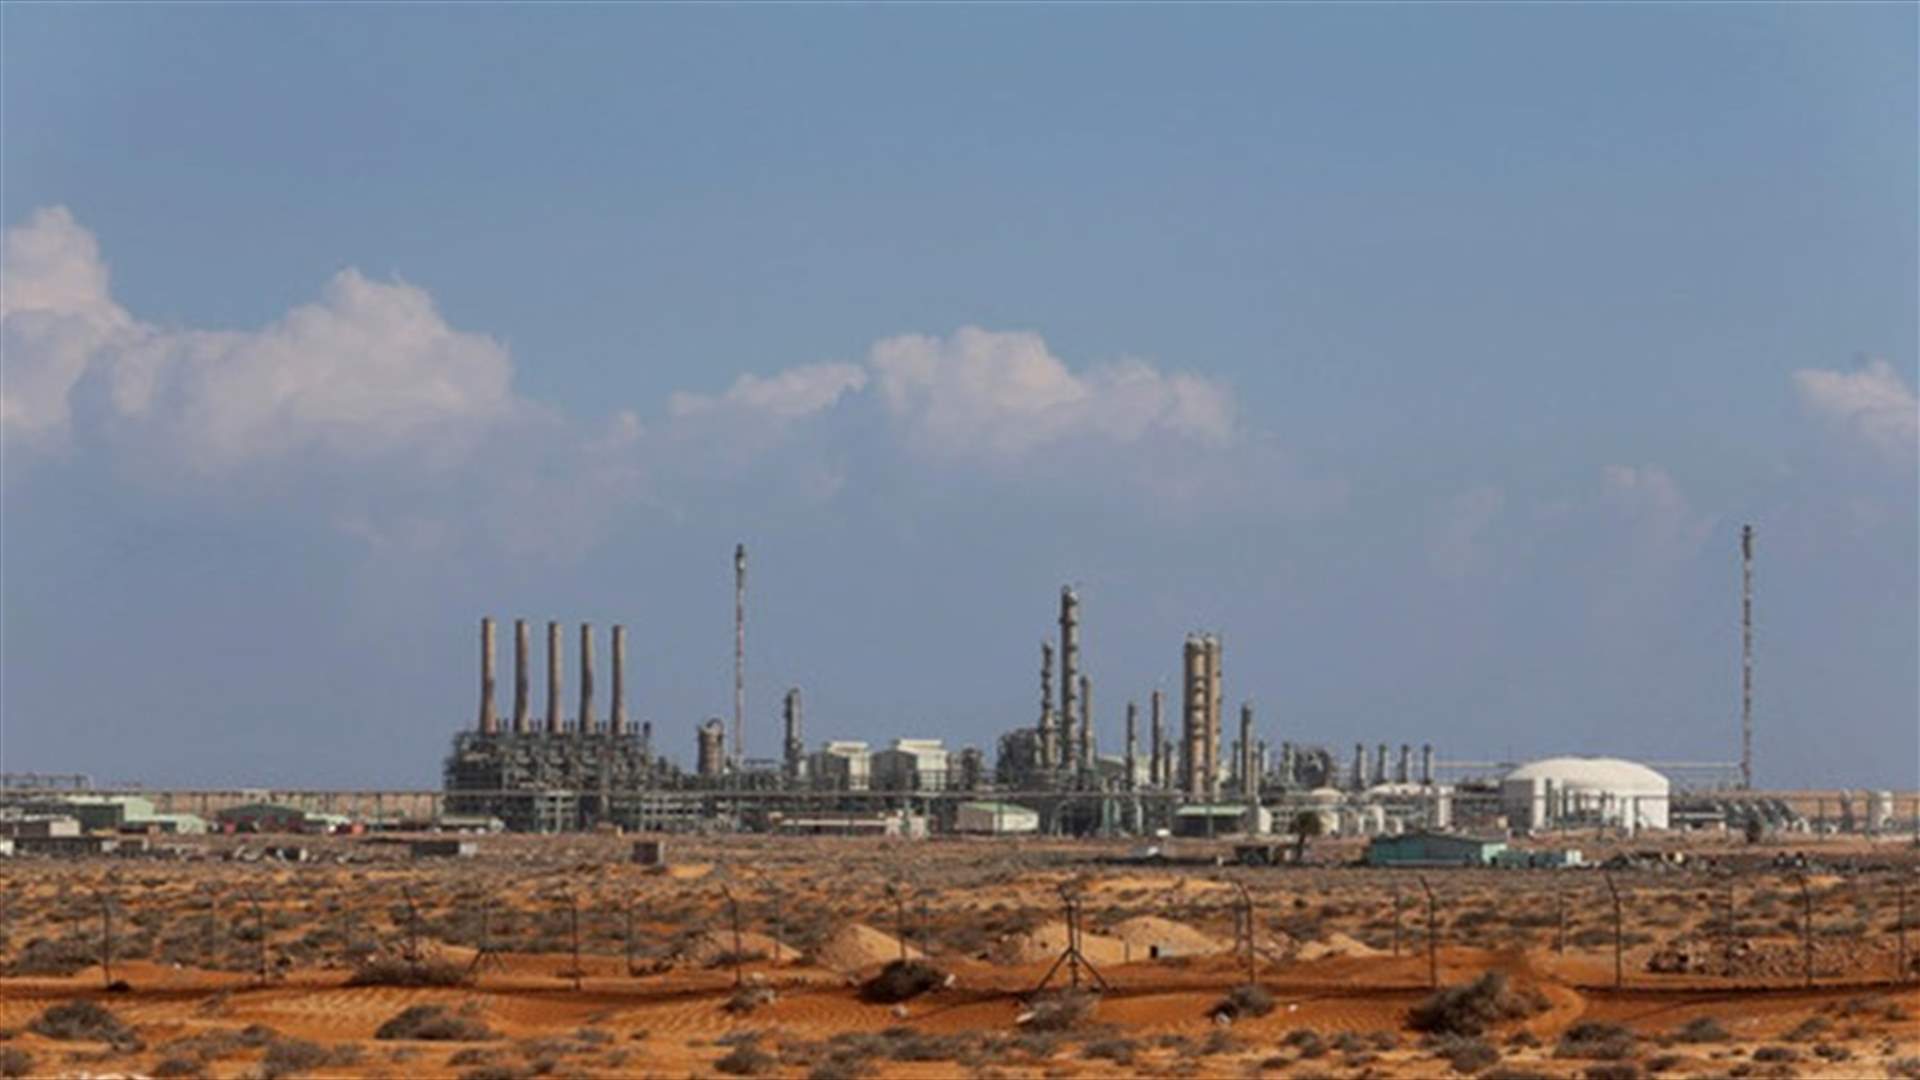 East Libyan forces clash with rivals near oil ports - officials